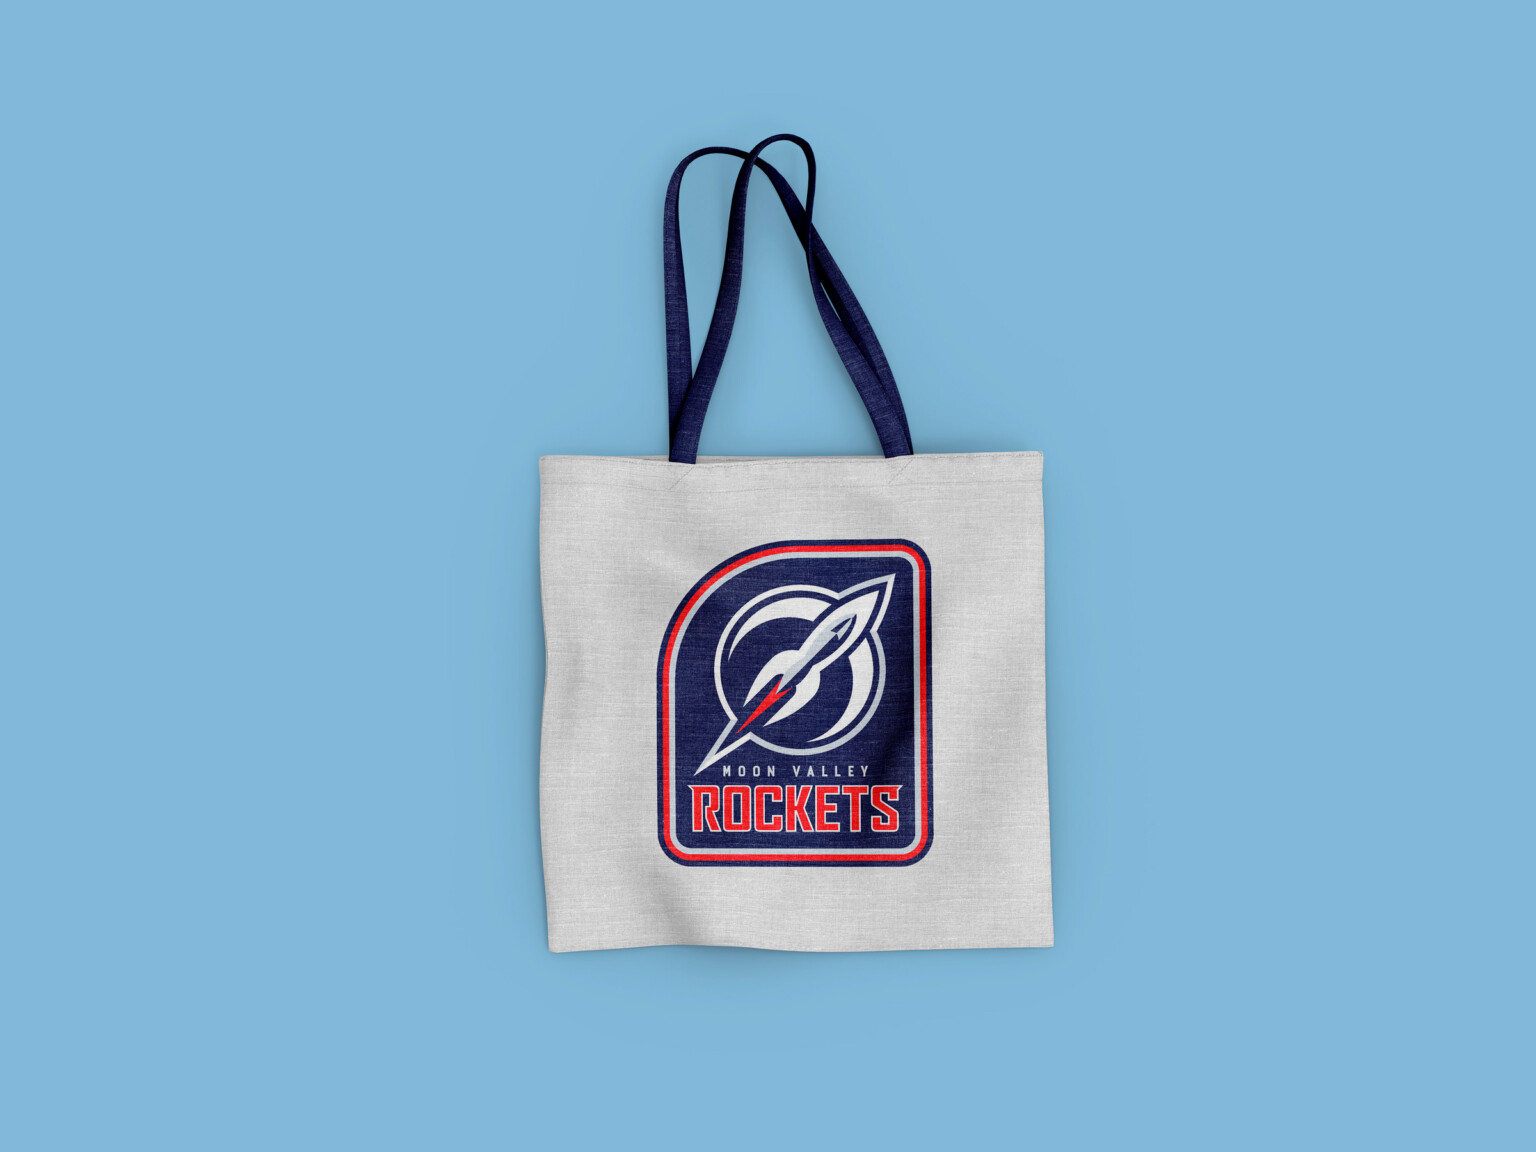 White tote bag with Rockets written on it and dark blue logo with red accents